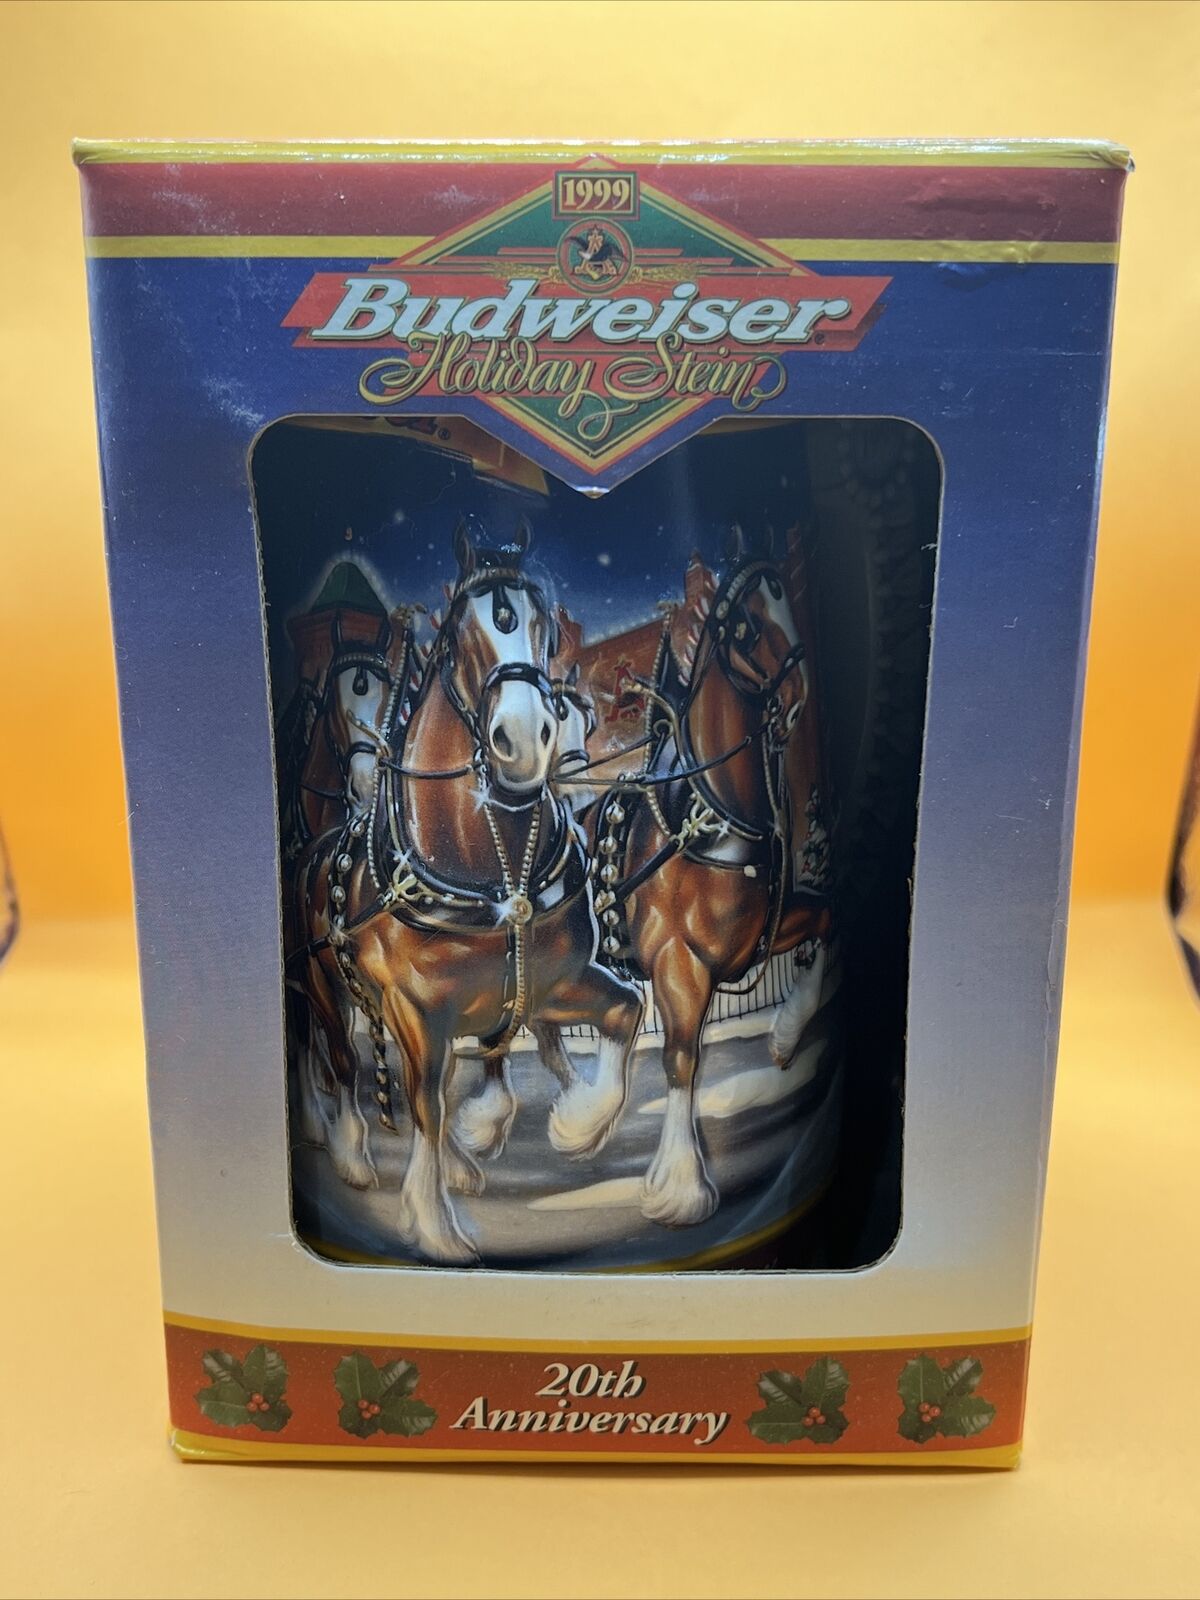 Budweiser Holiday Beer Stein 20th Anniversary 1999 Clydesdales Century Tradition